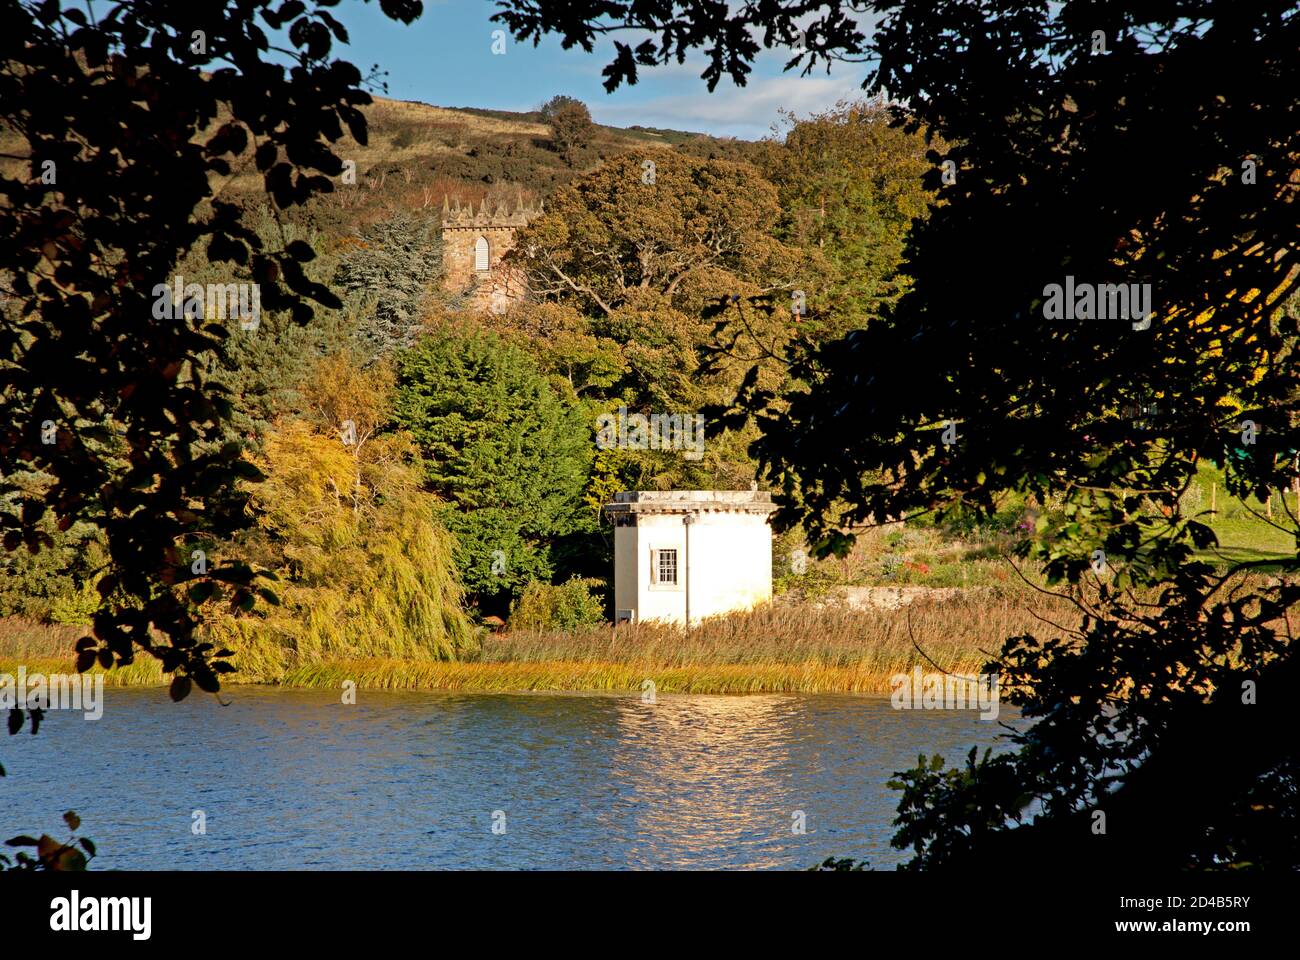 Edinburgh, Scotland, UK. 9 October 2020. Cool temperature of seven degrees with a breeze, Pictured: Duddingston Loch with the morning sun shining on Thomson's Tower in mid ground and Duddingston Kirk nestled in with the the trees in Dr Neil's Garden framed by the silhouette of tree branches in the foreground. Tower designed by William Henry Playfair  built in 1825 for the Duddingston Curling Society to store its stones. A meeting place for the curlers and a studio for the respected artist the Rev. John Thomson, minister of Duddingston from 1805 till 1840. Credit: Arch White/ Alamy Live News. Stock Photo